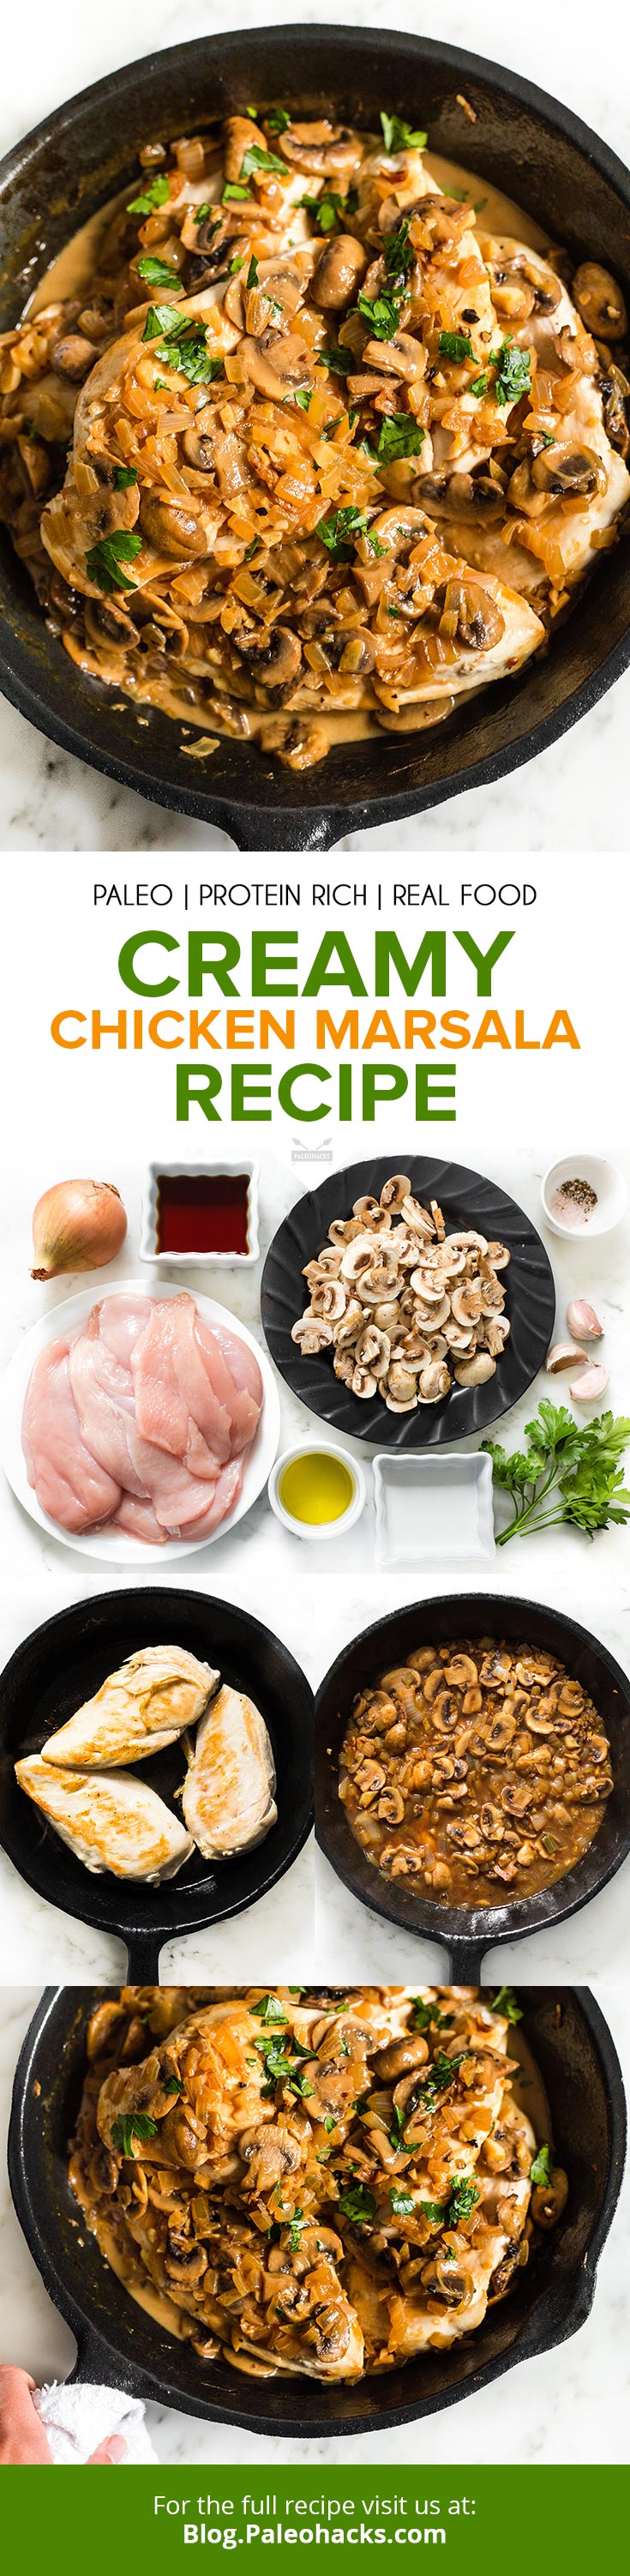 Cook up this juicy chicken marsala topped with caramelized onions and sliced mushrooms. So simple, yet so satisfying!